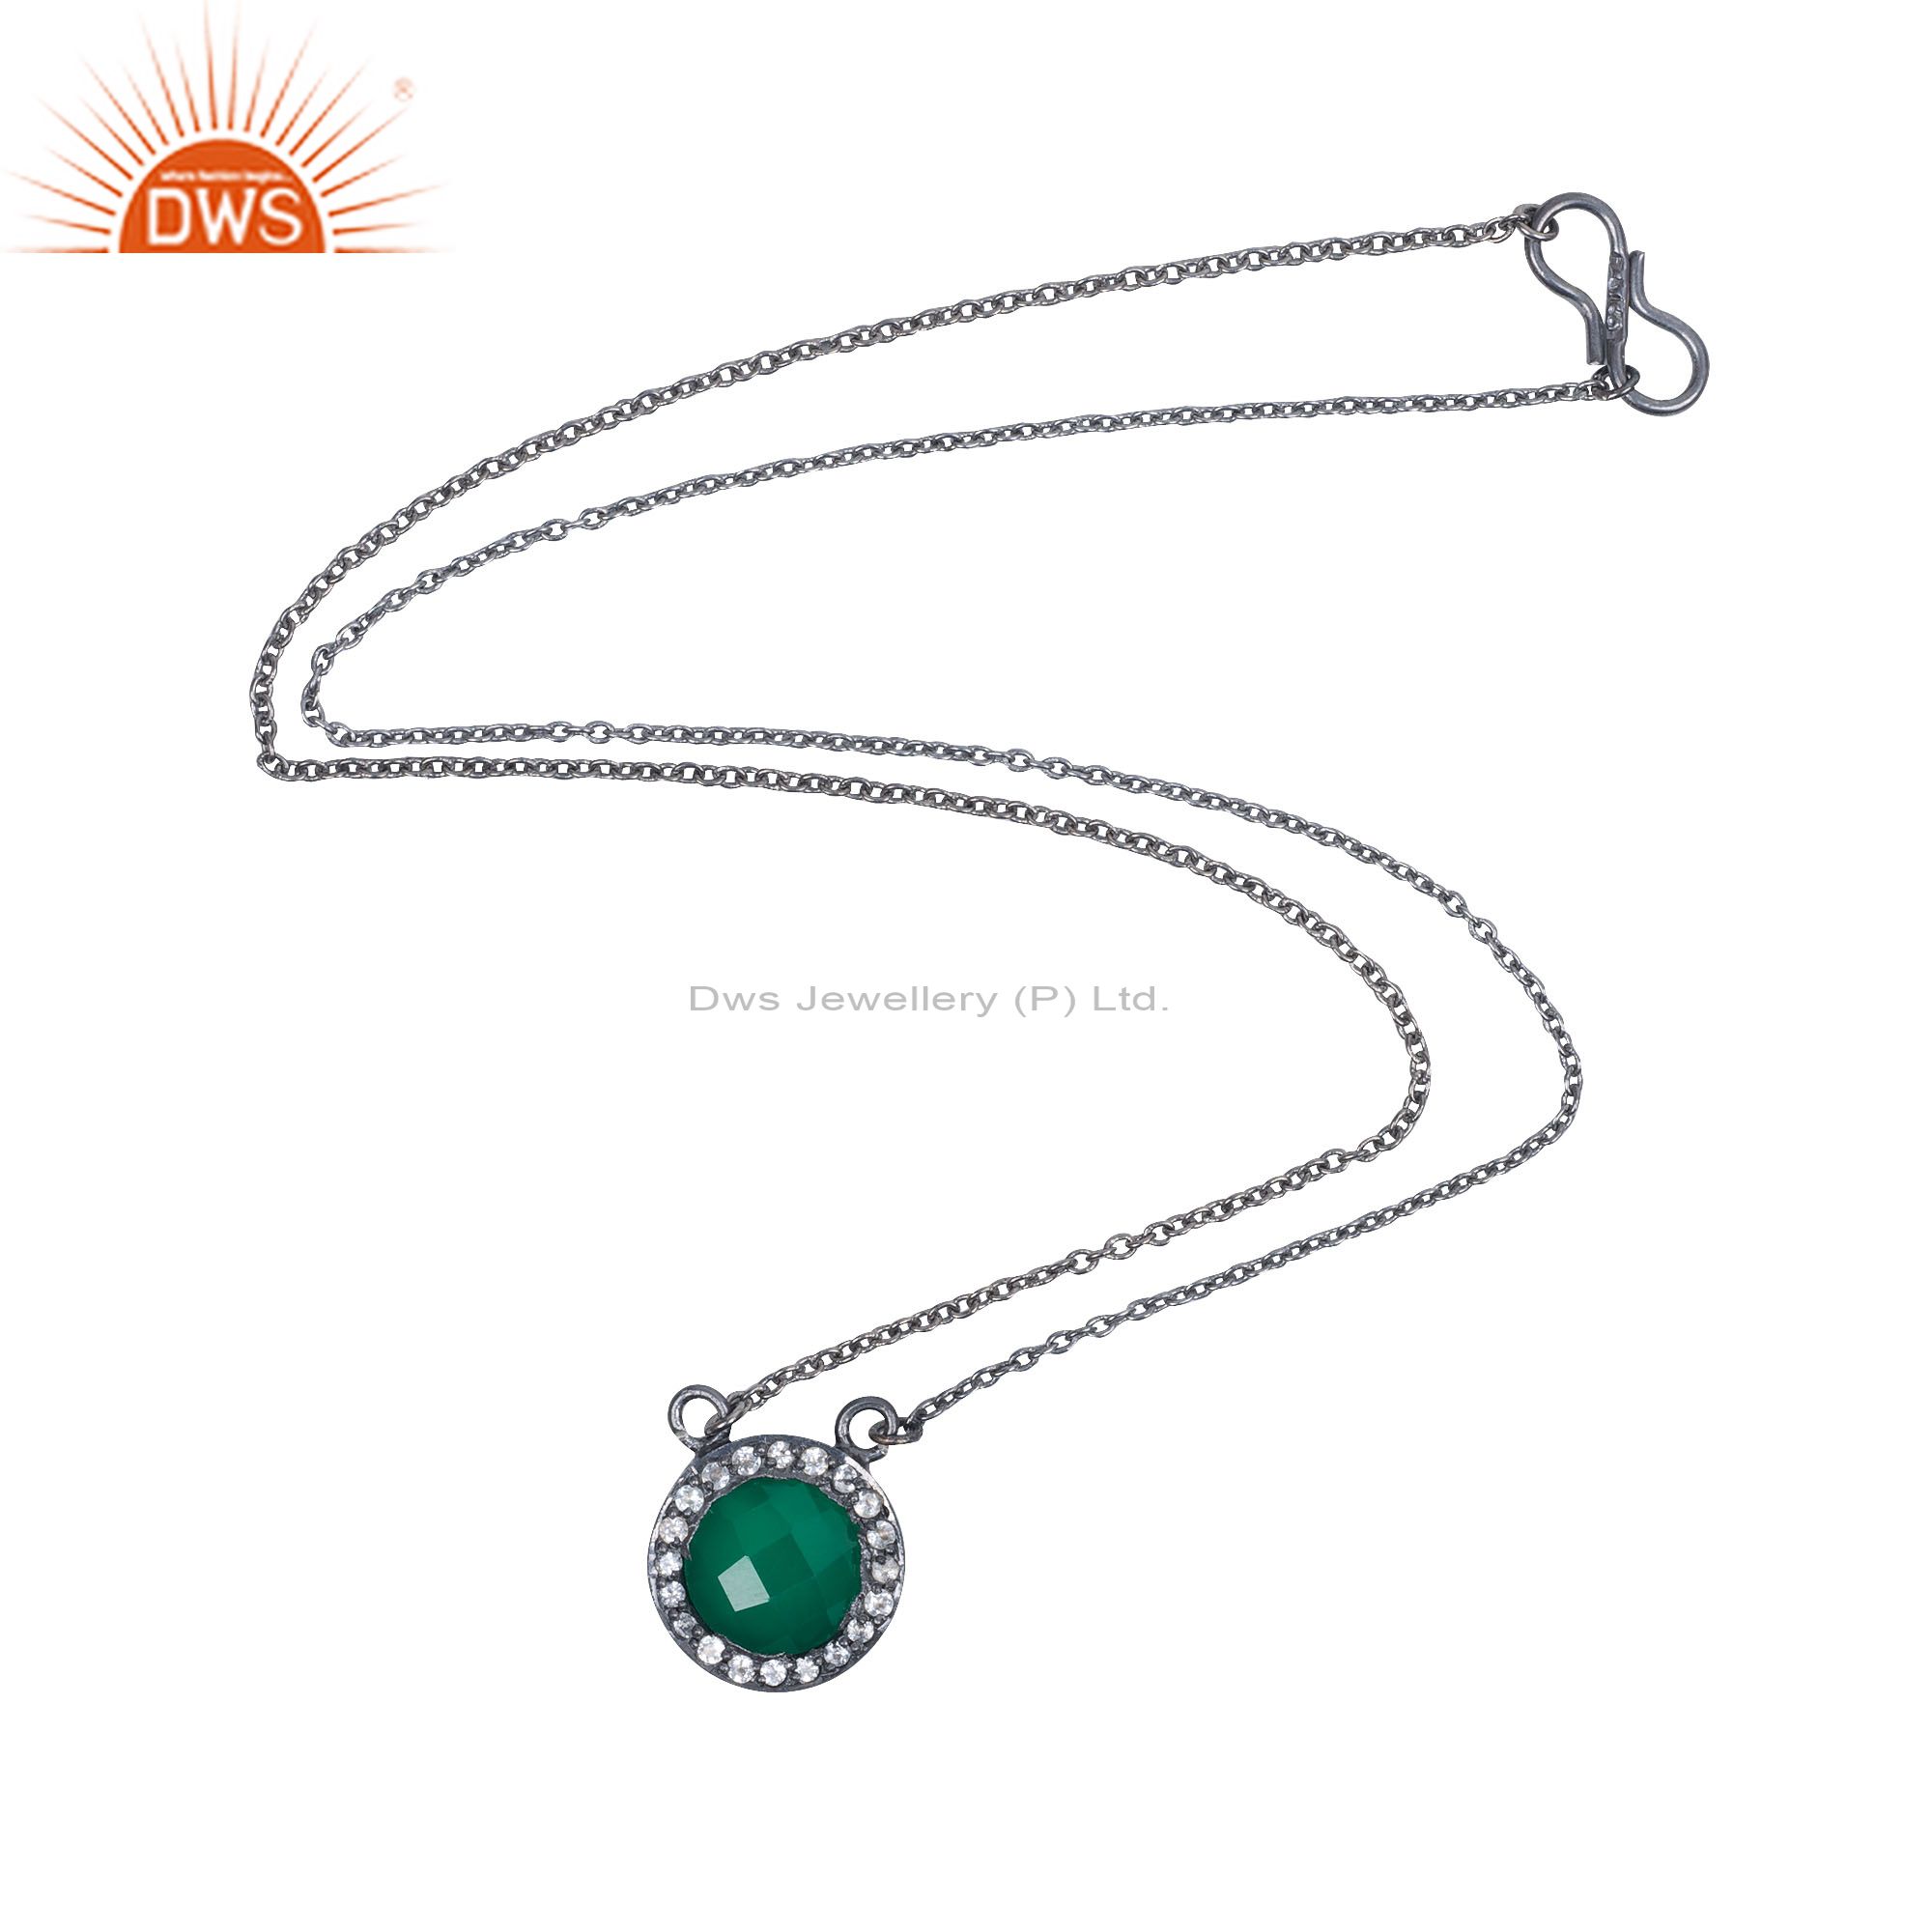 Oxidized sterling silver green onyx and white topaz halo pendant chain necklace